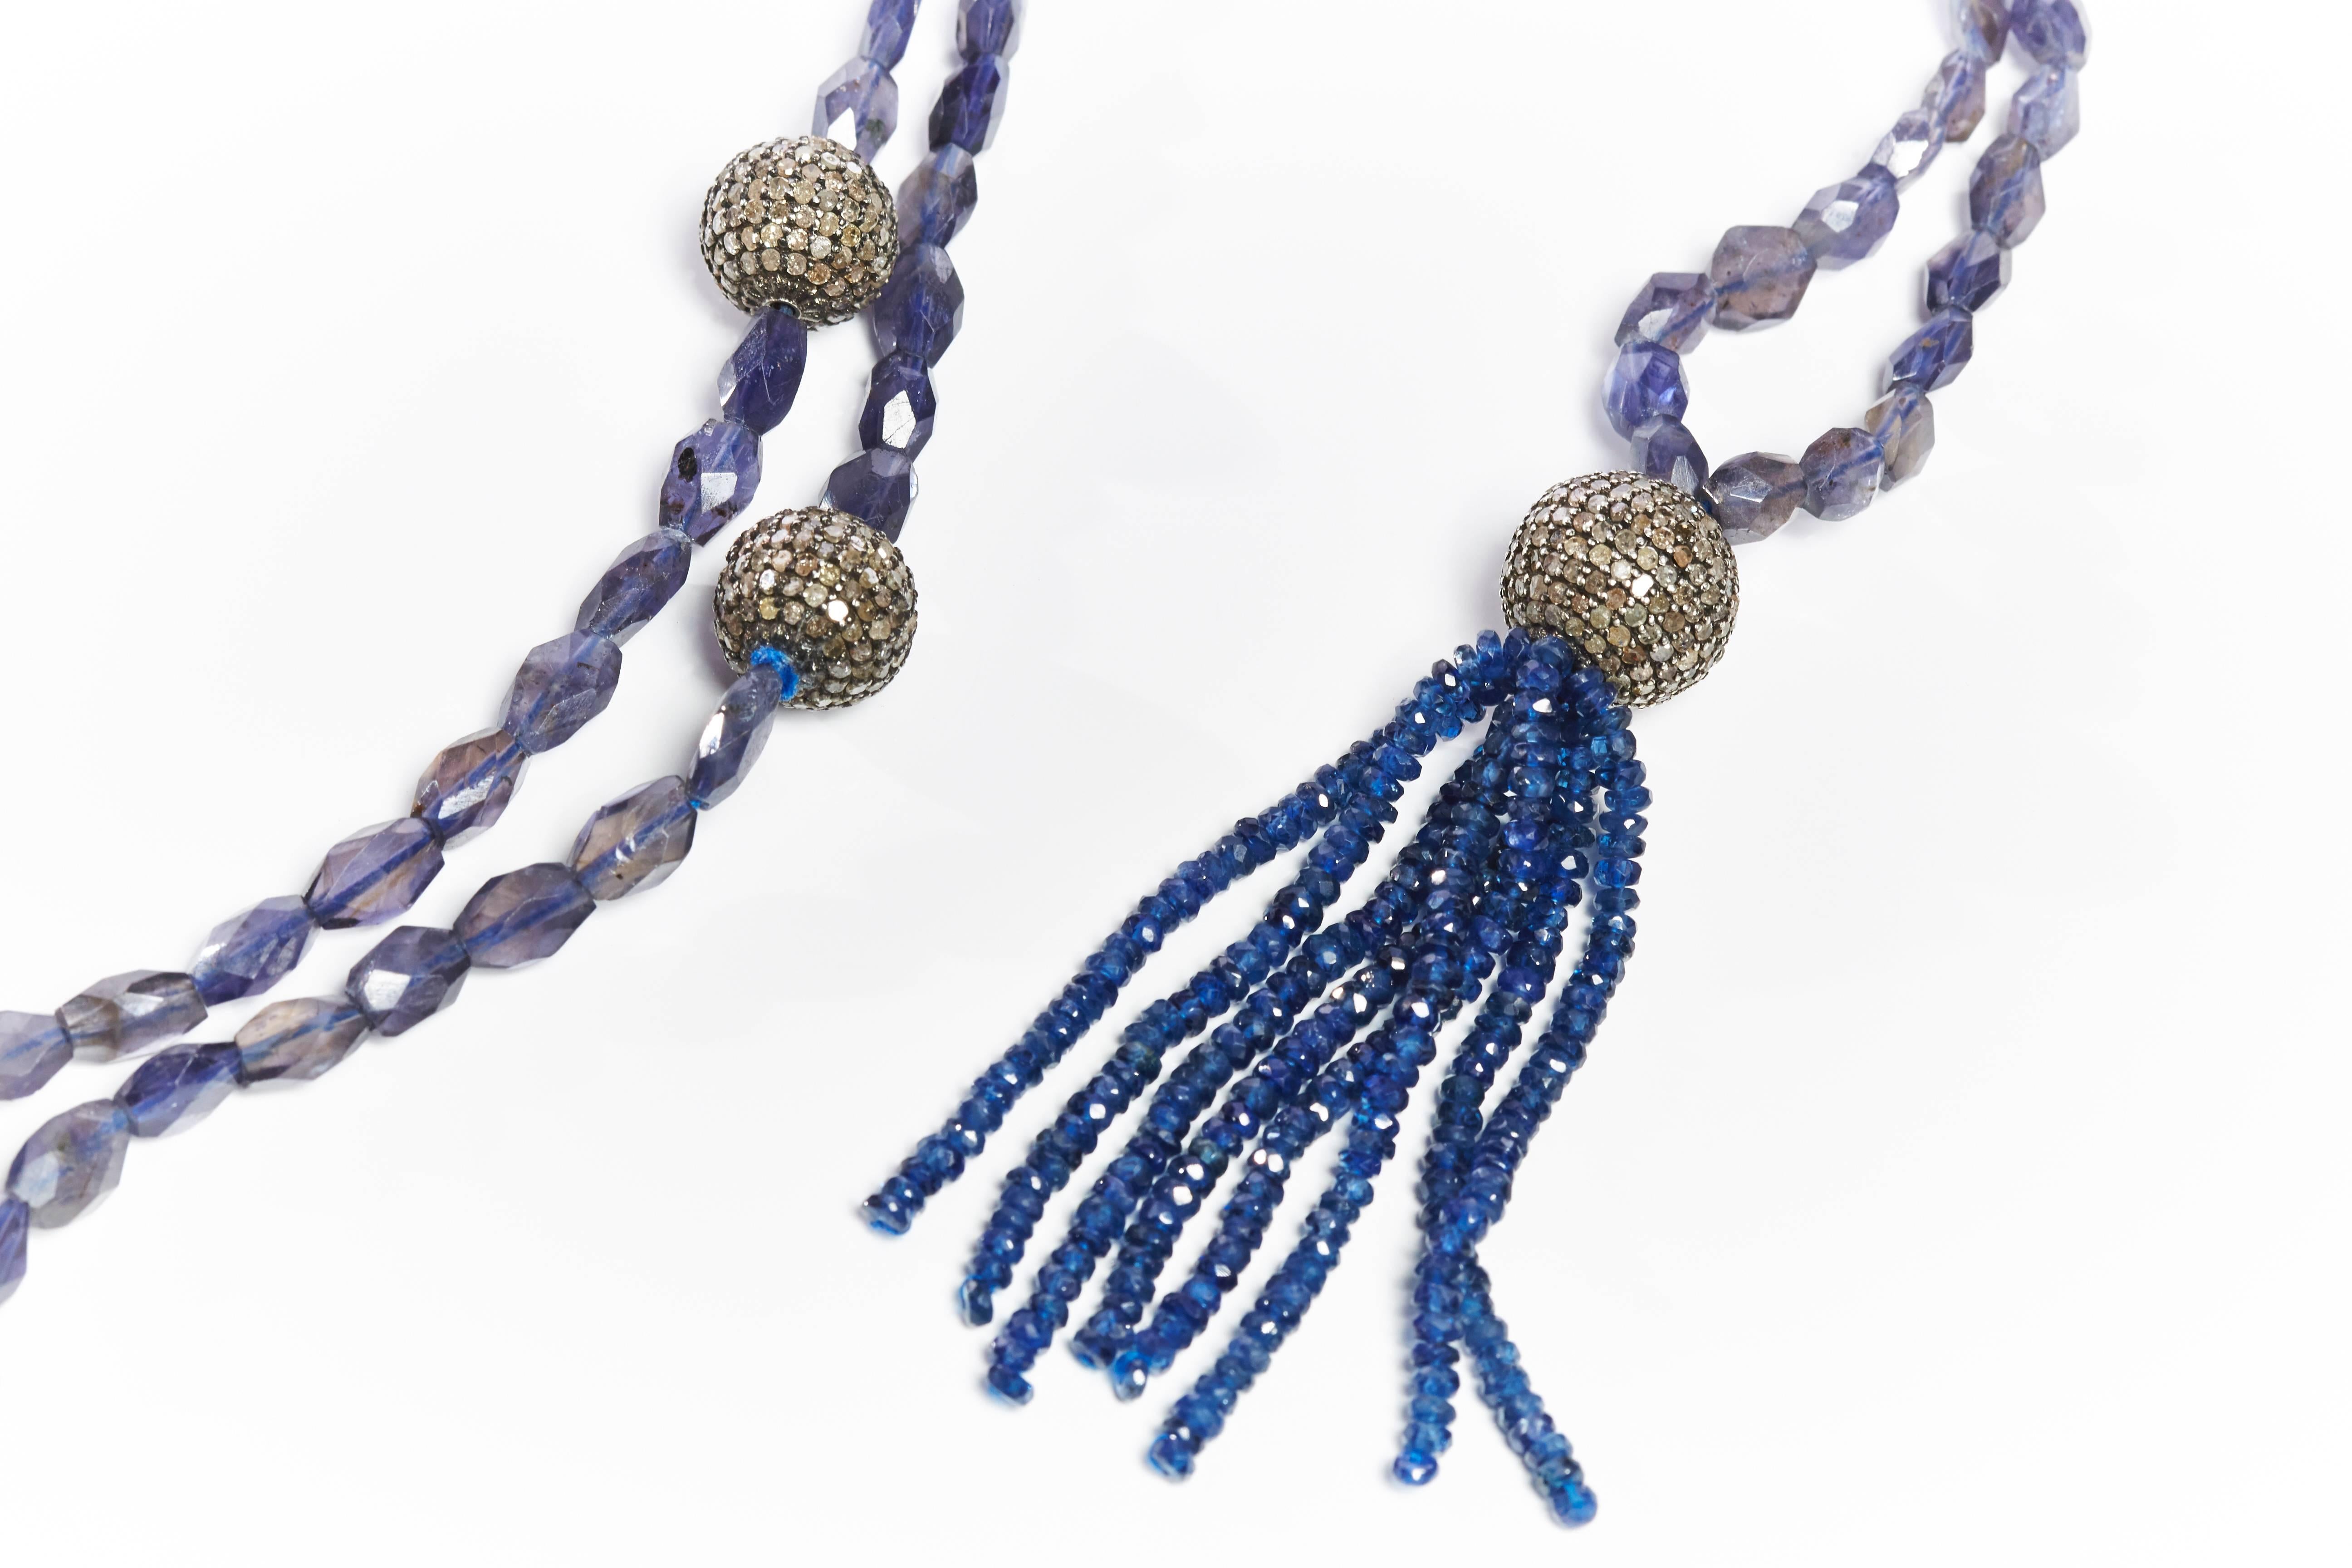 Jade Jagger Diamond and Sapphire Disco Ball Tassel Necklace featuring sapphire beads.
From the Disco Ball Collection.
Handmade in India.
35.2 ct. sapphire
172.5 ct. lolite